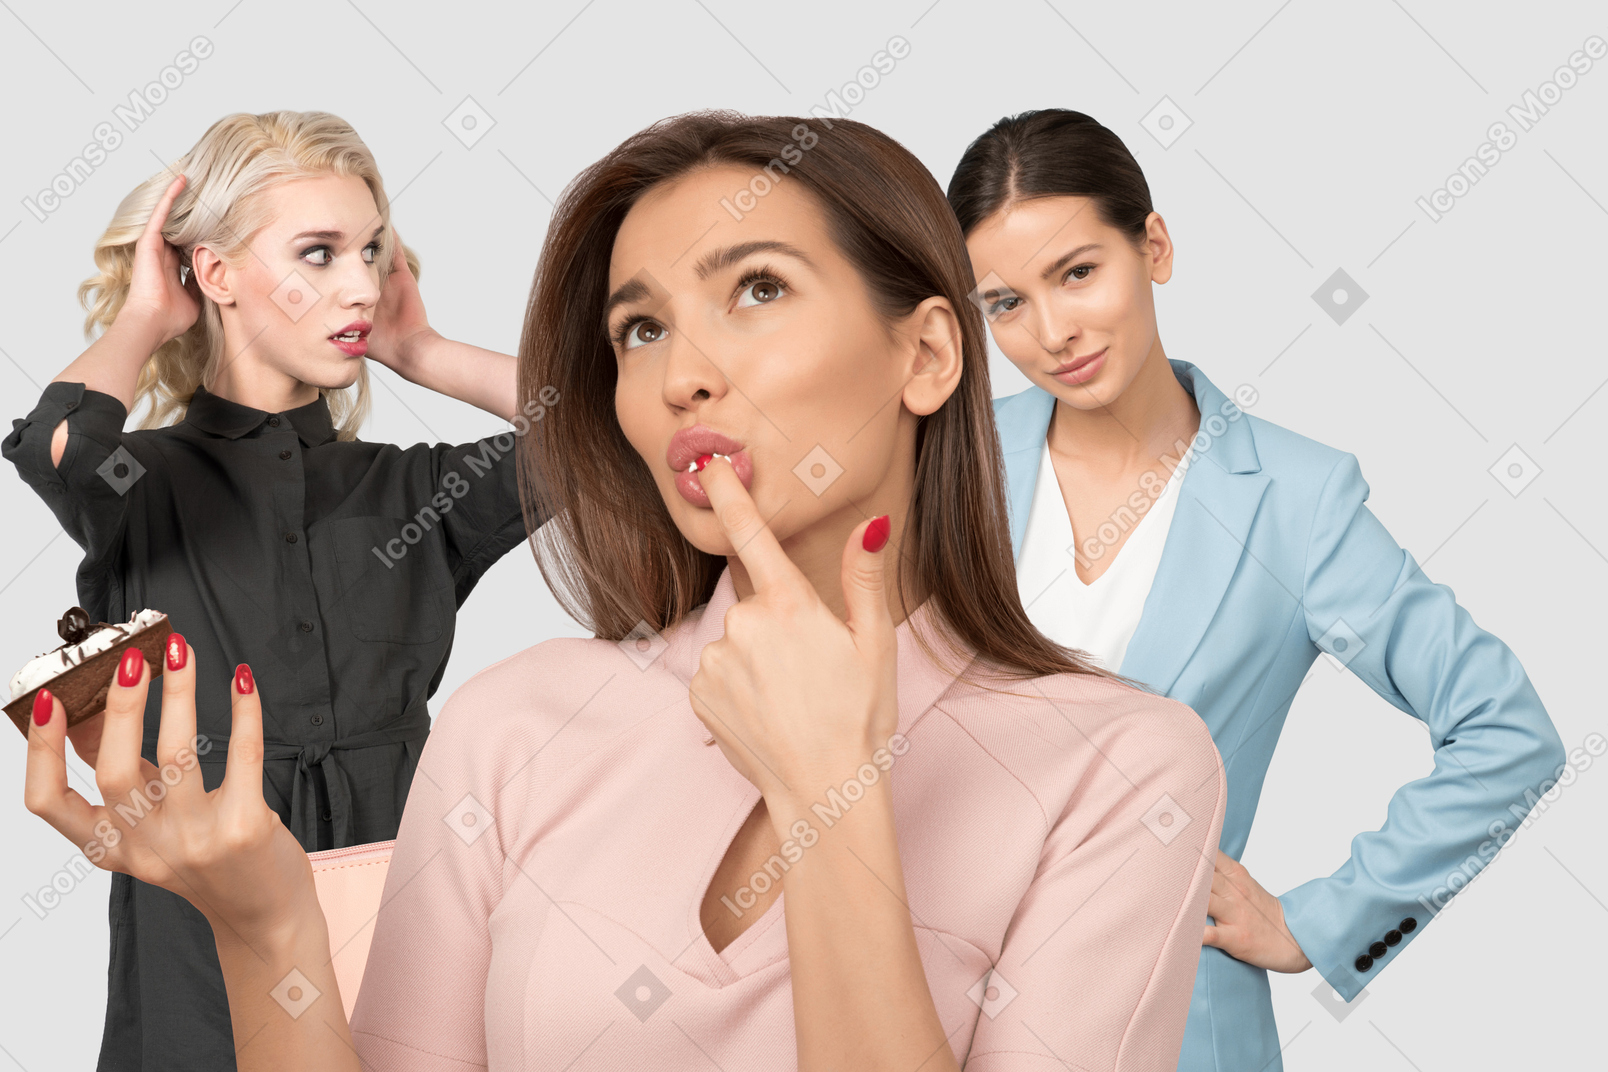 Women envying another woman who has the dessert